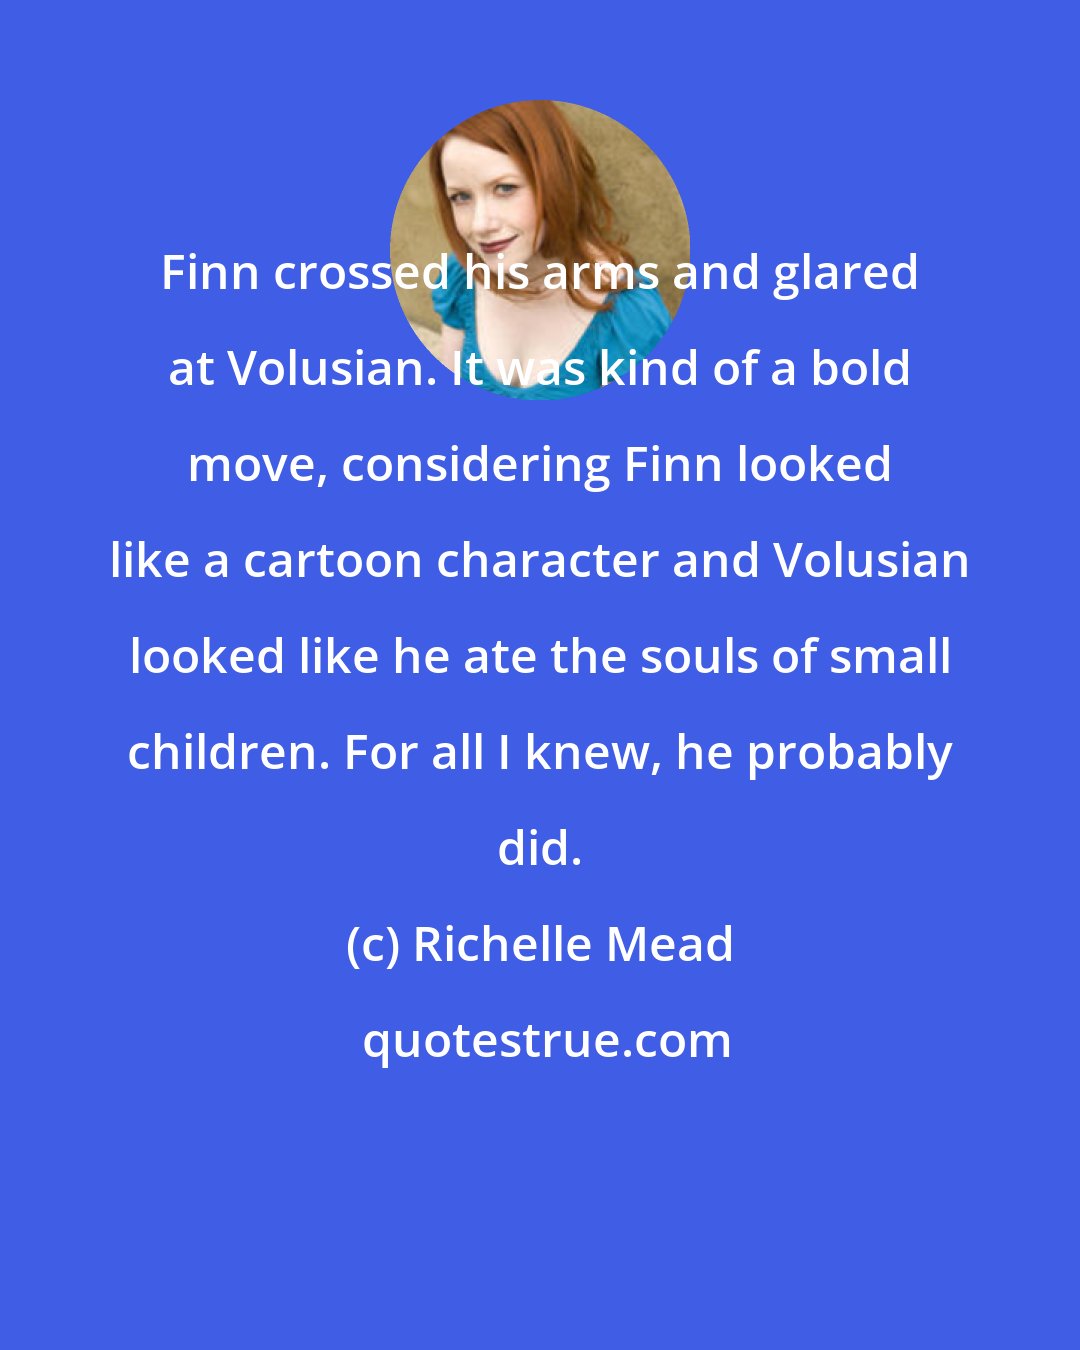 Richelle Mead: Finn crossed his arms and glared at Volusian. It was kind of a bold move, considering Finn looked like a cartoon character and Volusian looked like he ate the souls of small children. For all I knew, he probably did.